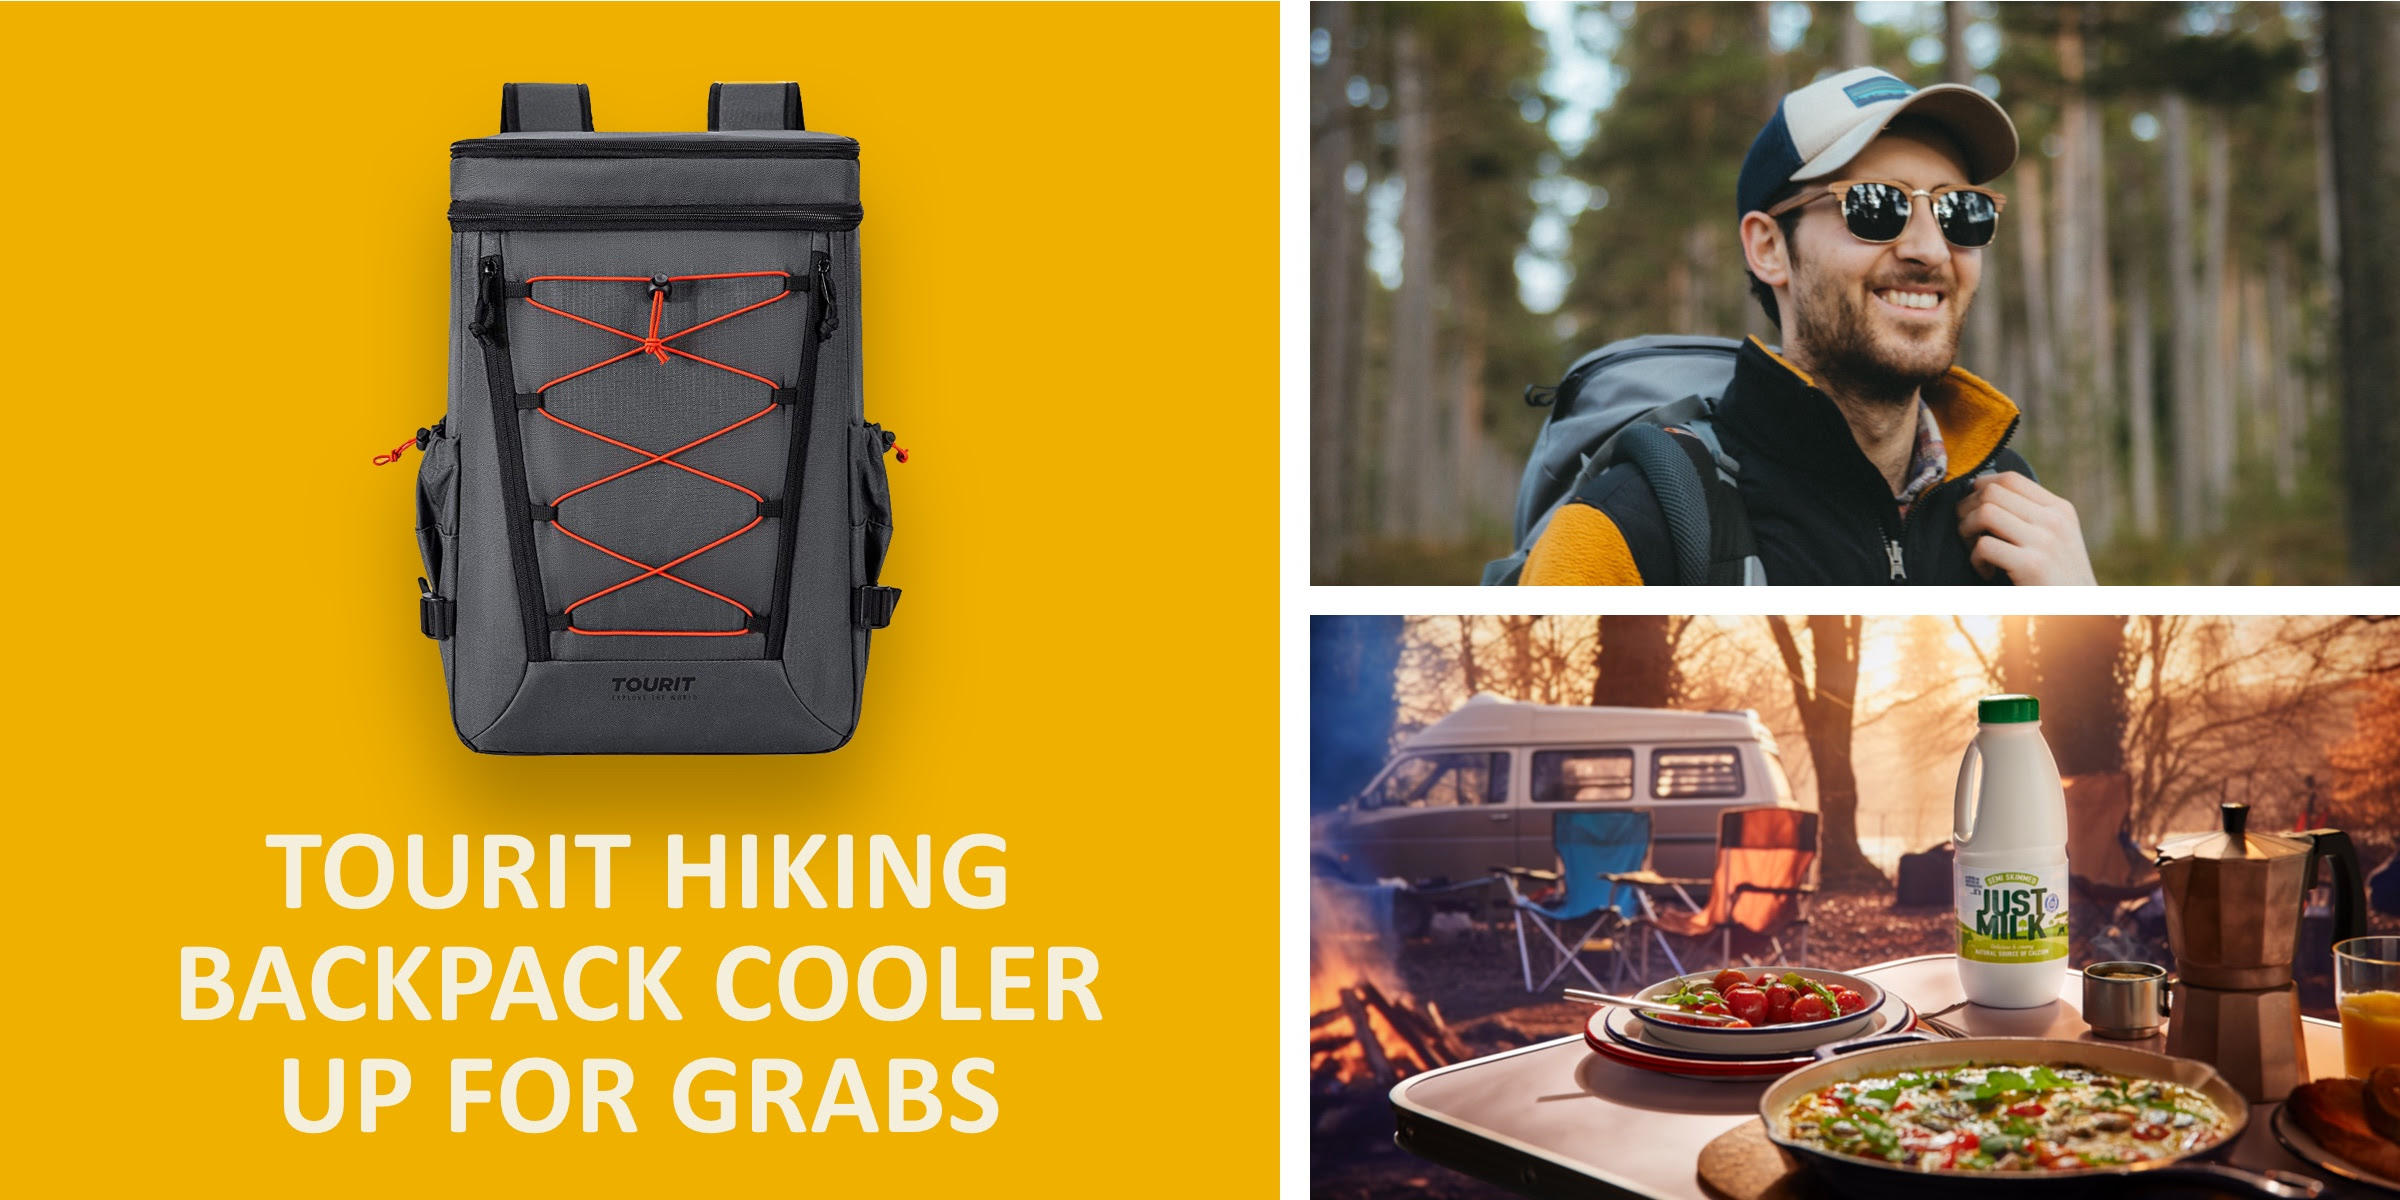 win a picnic cooler backpack with JUST MILK